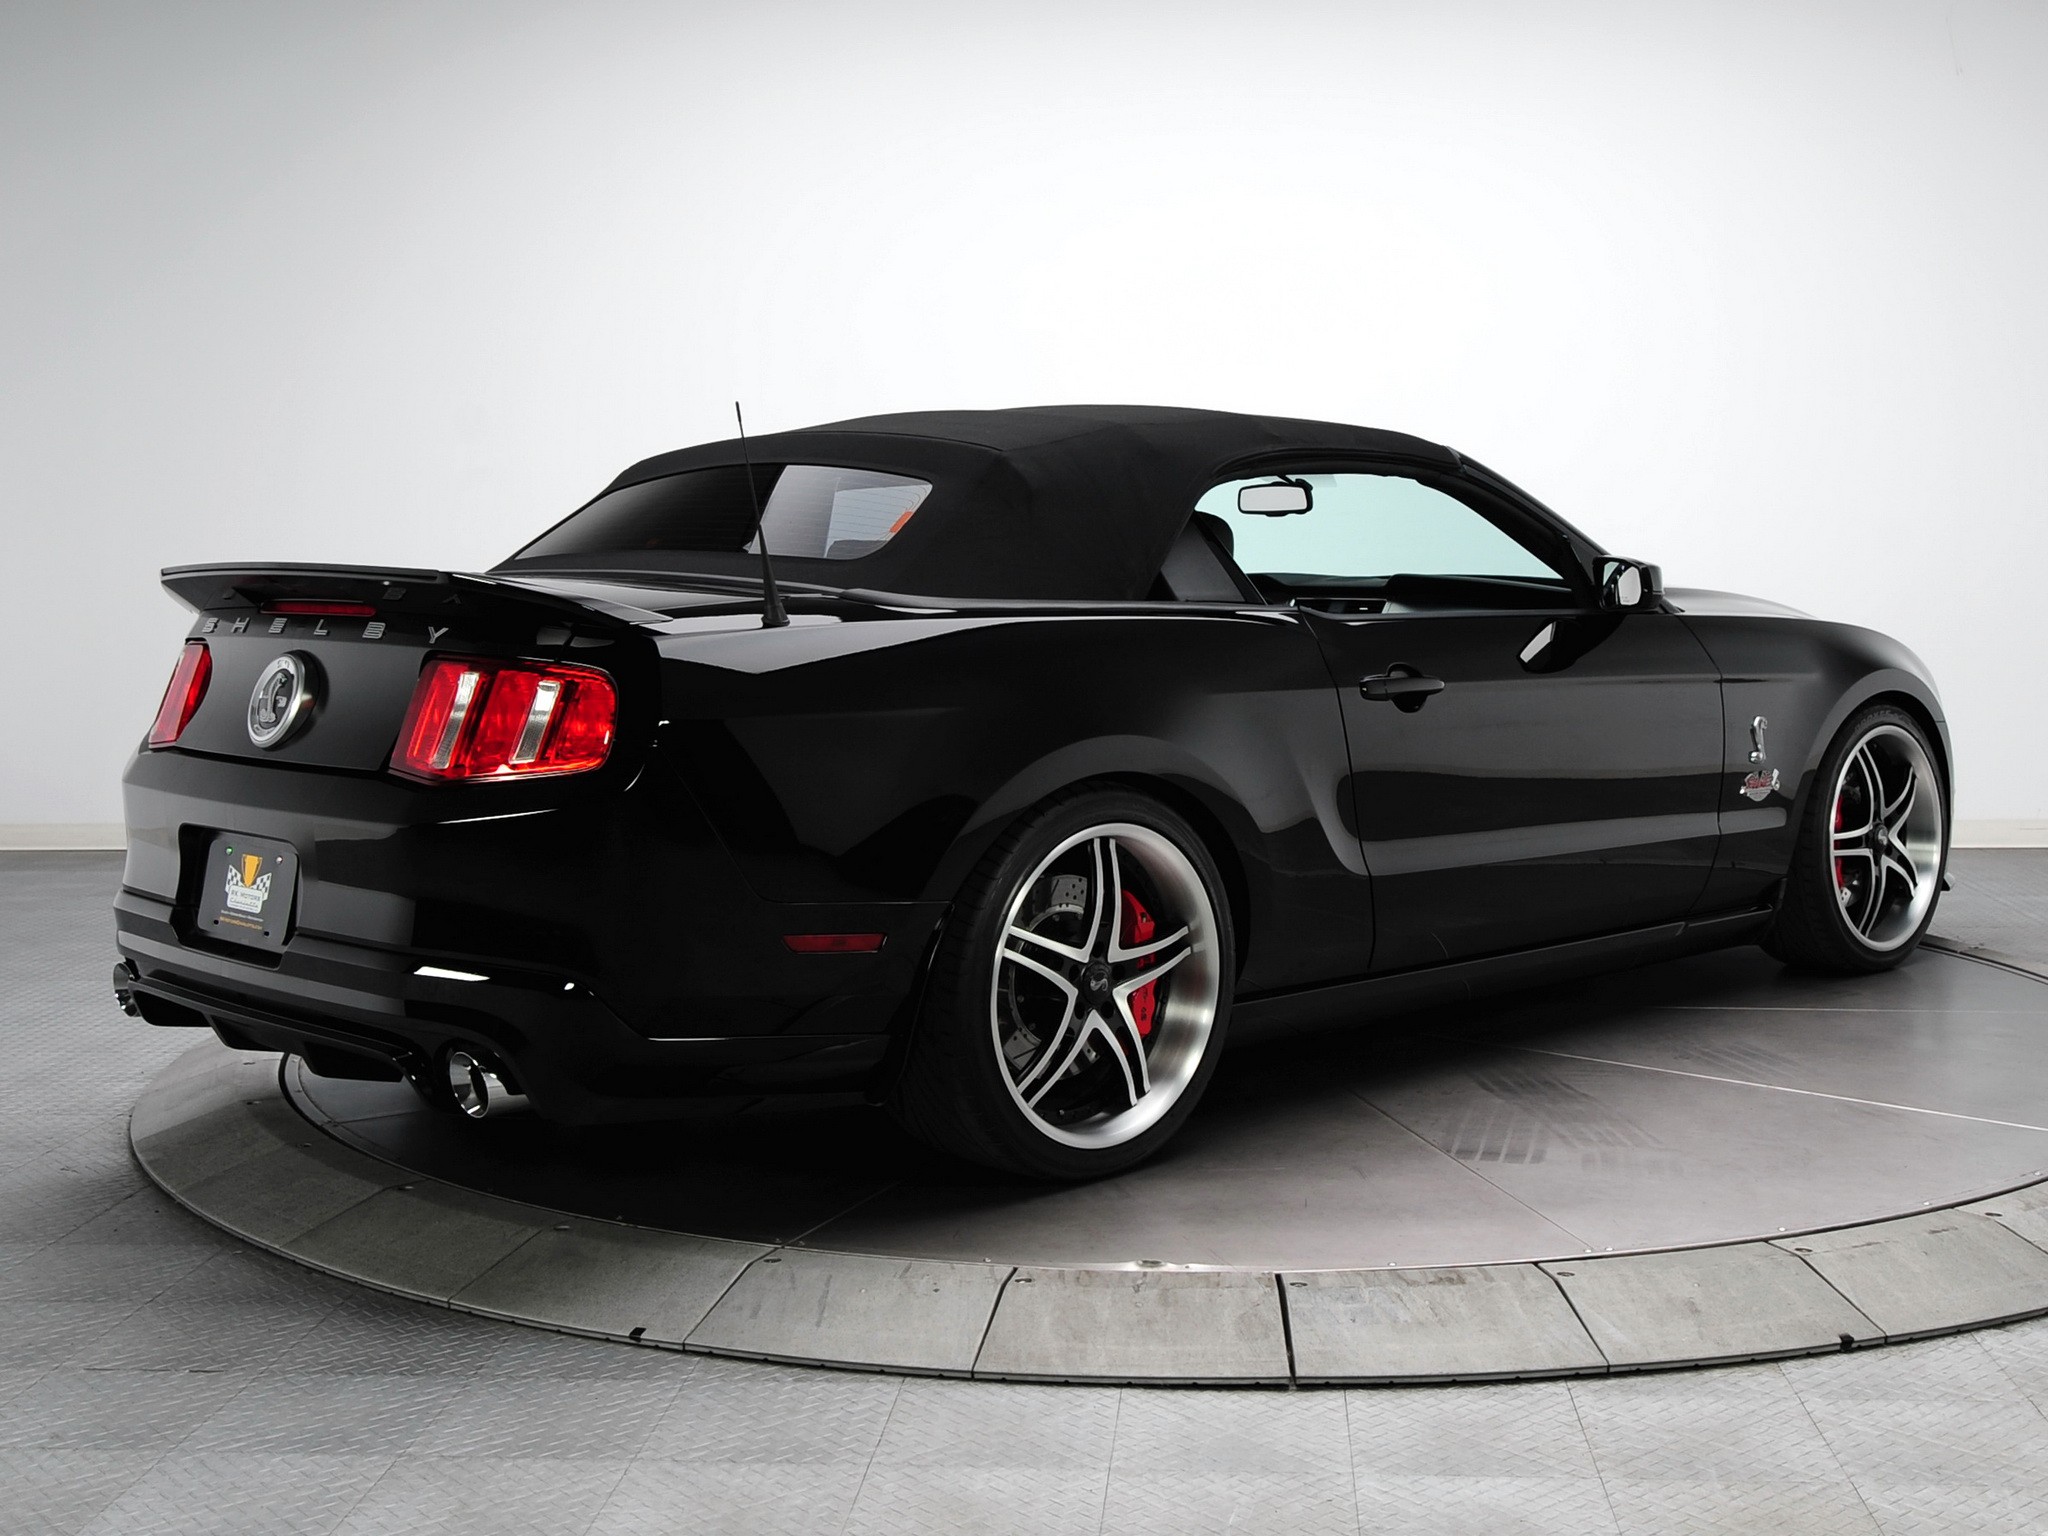 FORD Mustang Shelby GT500 Convertible - 2009, 2010, 2011, 2012